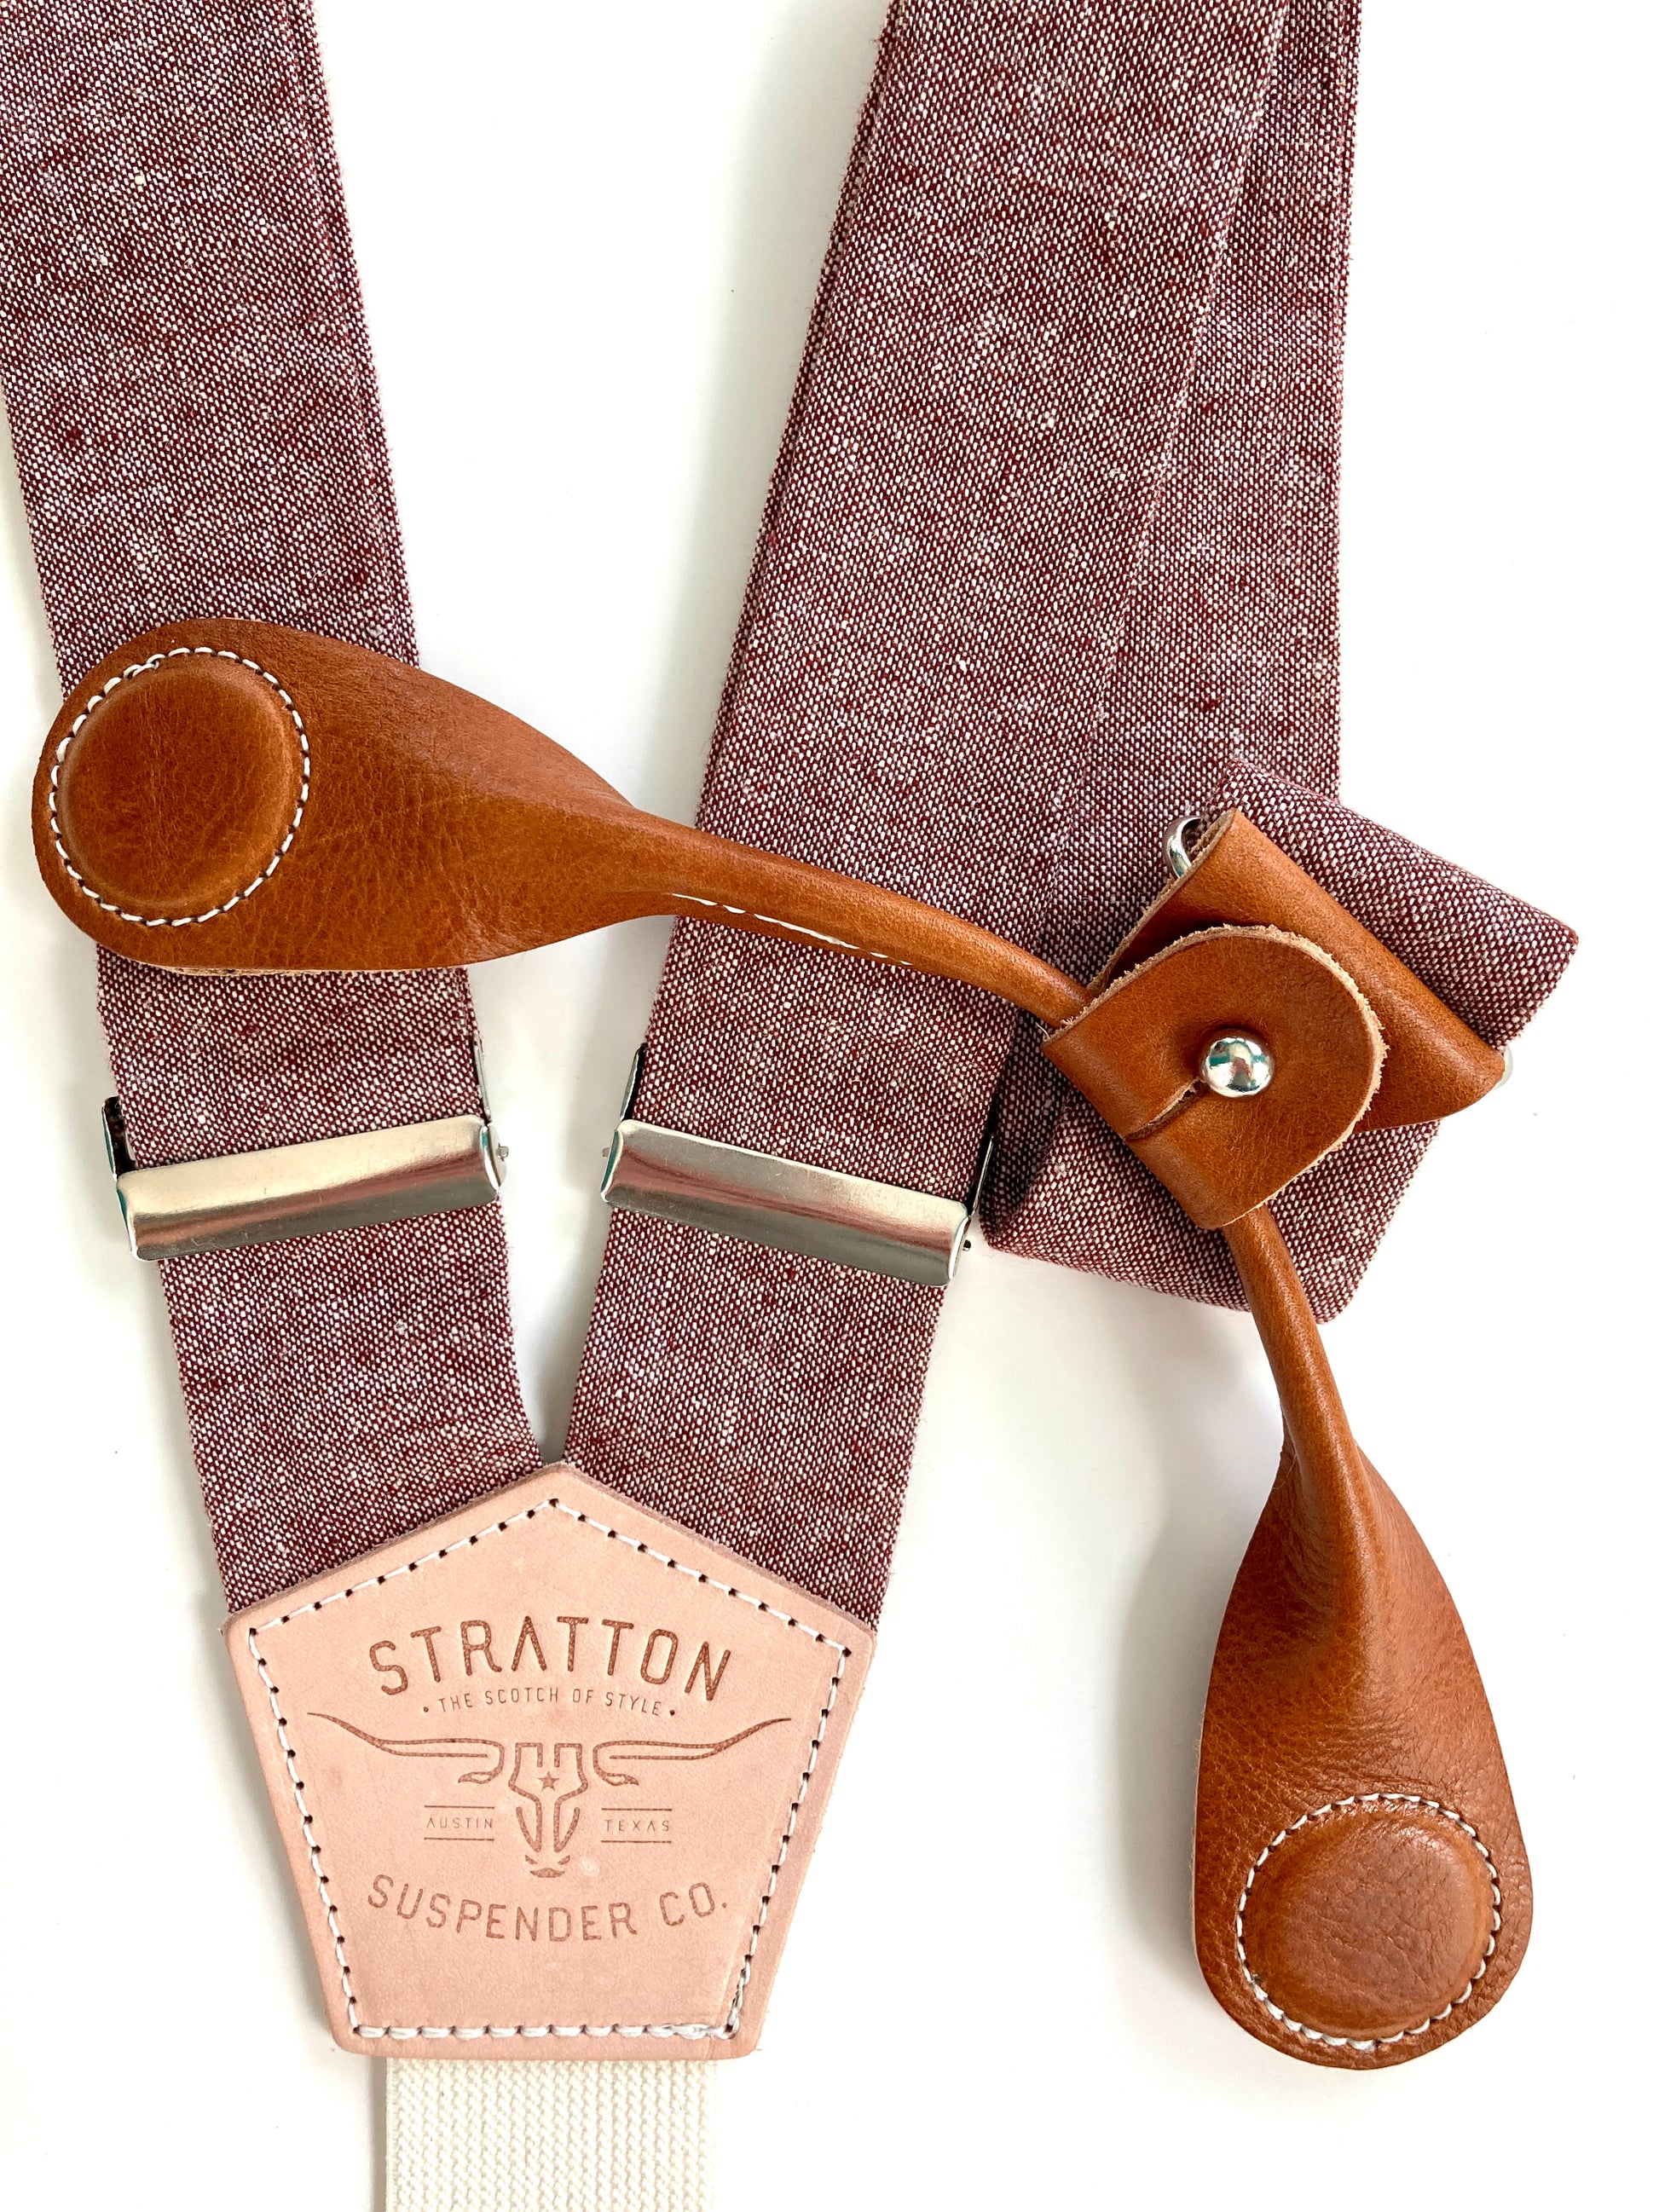 Stratton Suspender Co. features the Rust (Maroon) linen suspenders on veg tan shoulder leather with cream colored elastic back strap for the Fall 2022 suspenders collection Magnetic Stratton Suspender clasps in Tan Pontedero Italian leather hand-picked by Stratton Suspender Co.